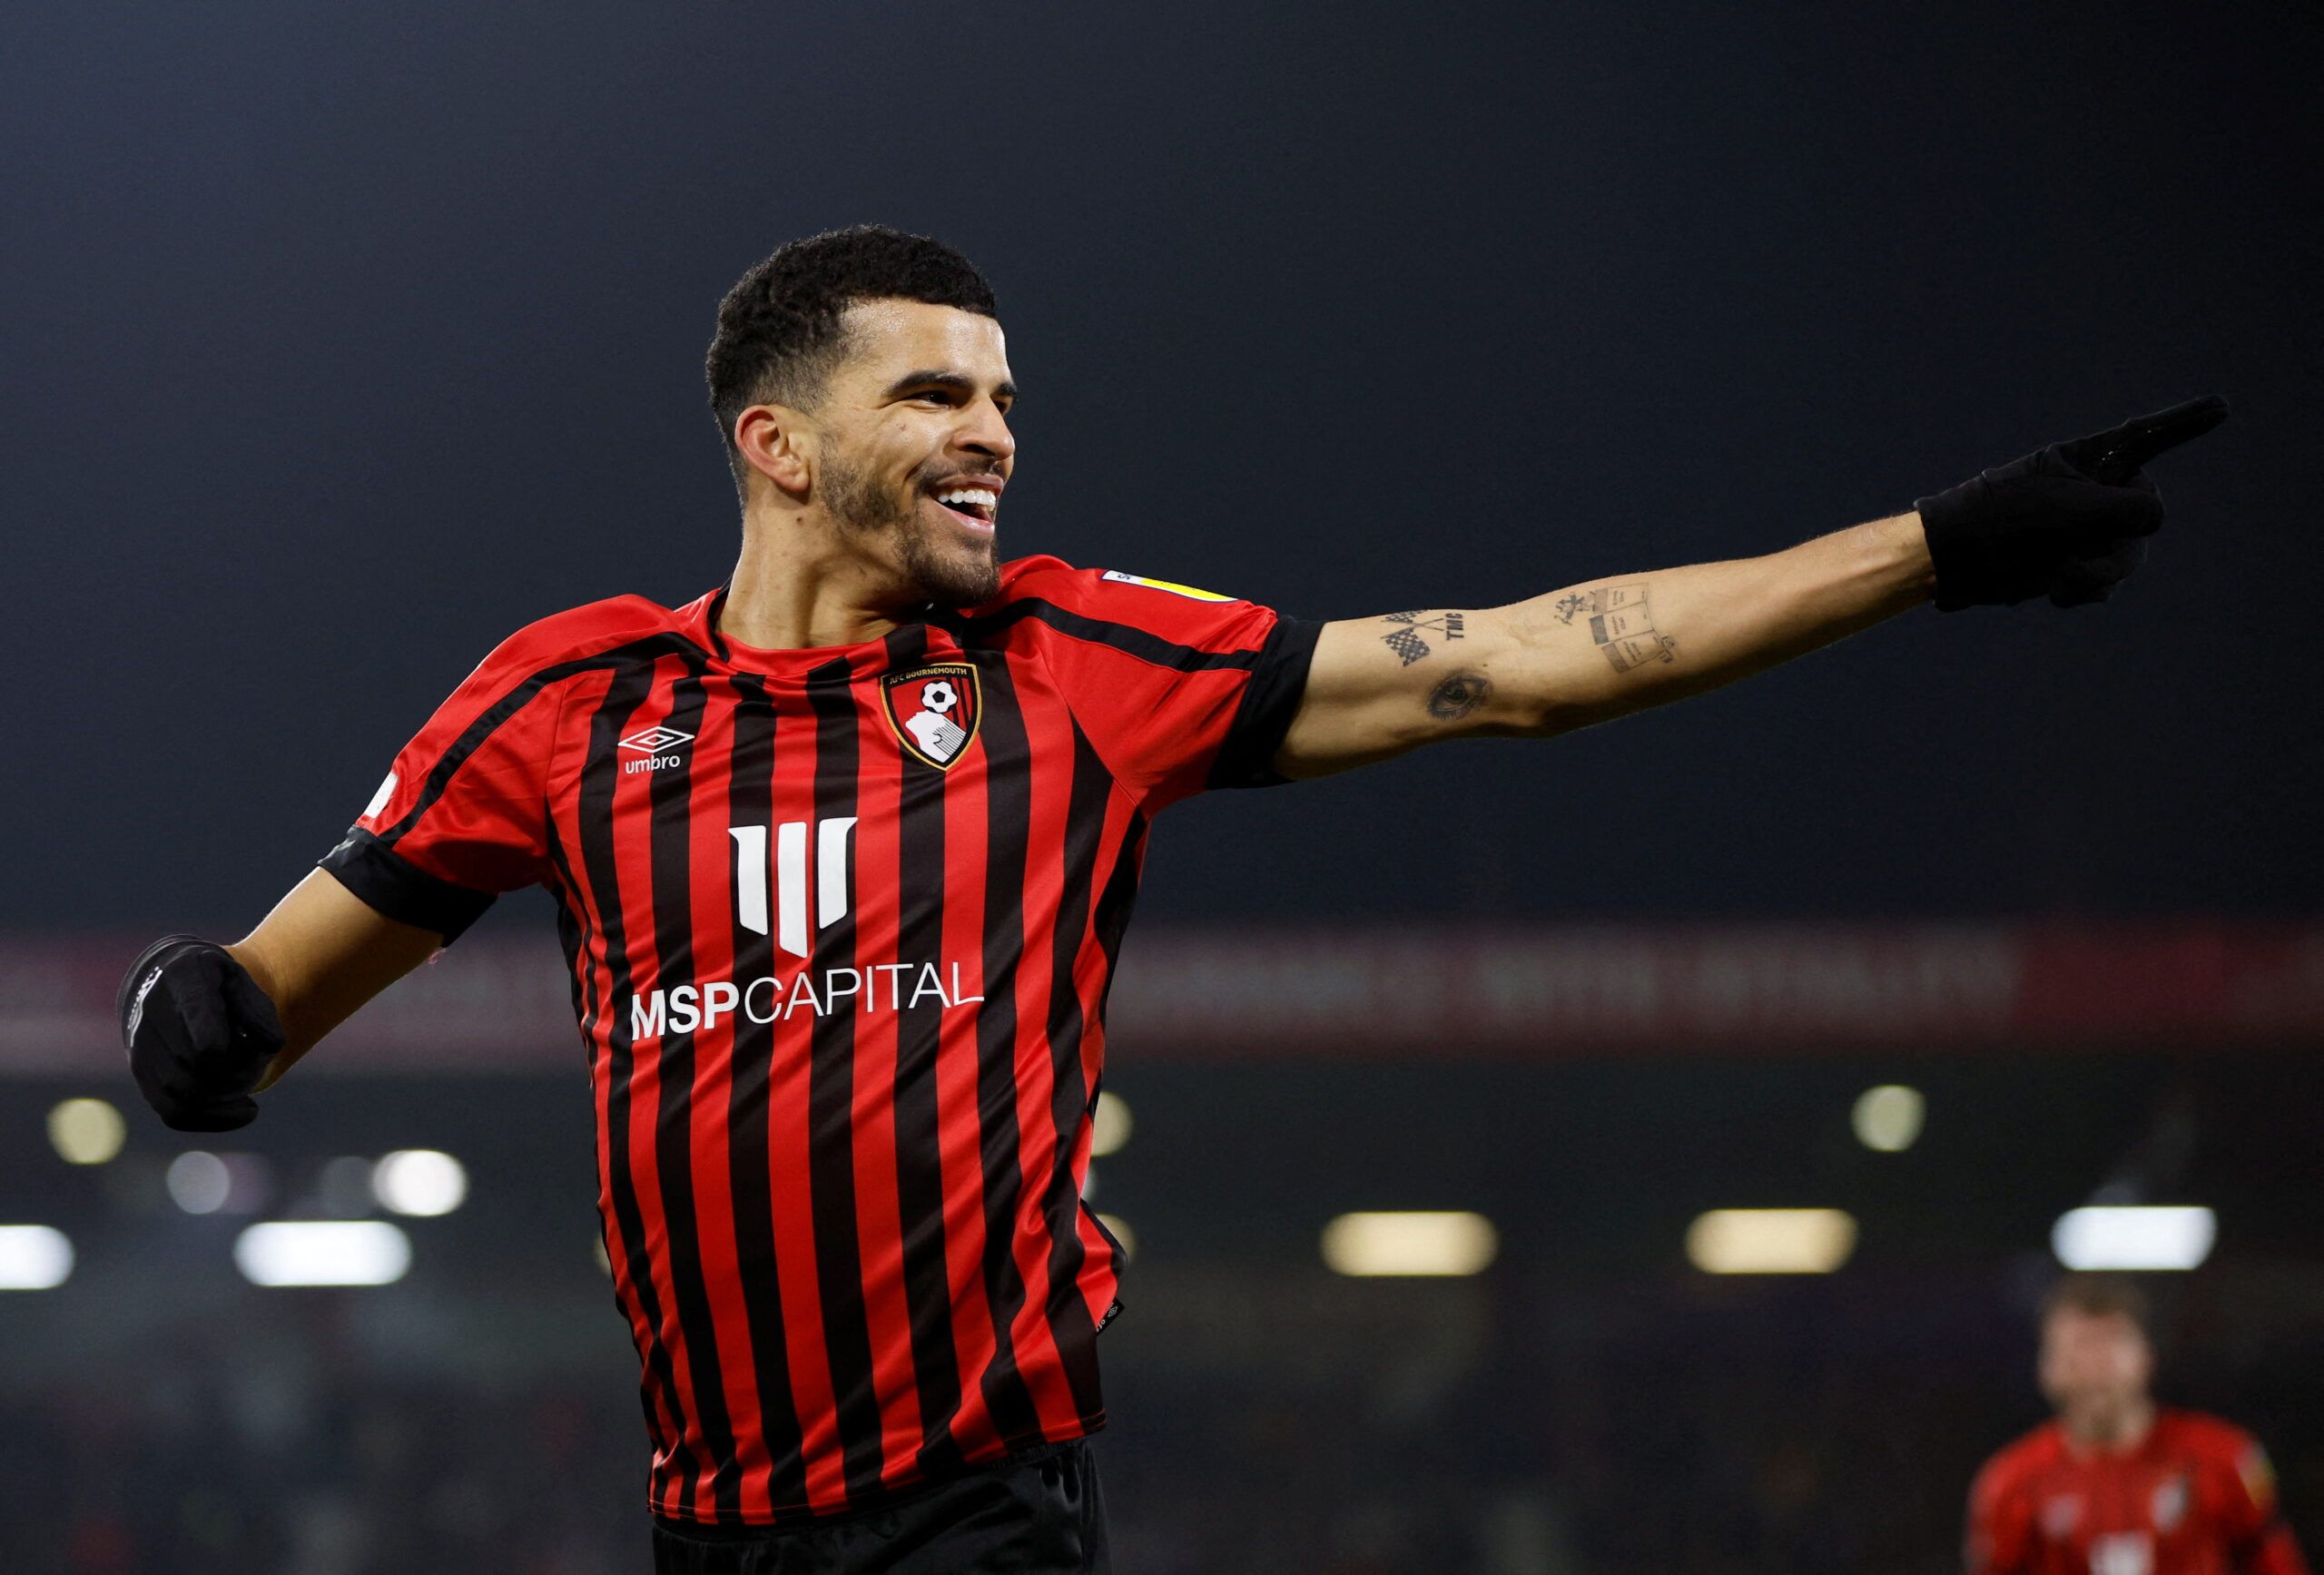 Soccer Football - Championship - AFC Bournemouth v Reading - Vitality Stadium, Bournemouth, Britain - March 15, 2022   Bournemouth?s Dominic Solanke celebrates scoring their first goal  Action Images/John Sibley  EDITORIAL USE ONLY. No use with unauthorized audio, video, data, fixture lists, club/league logos or 